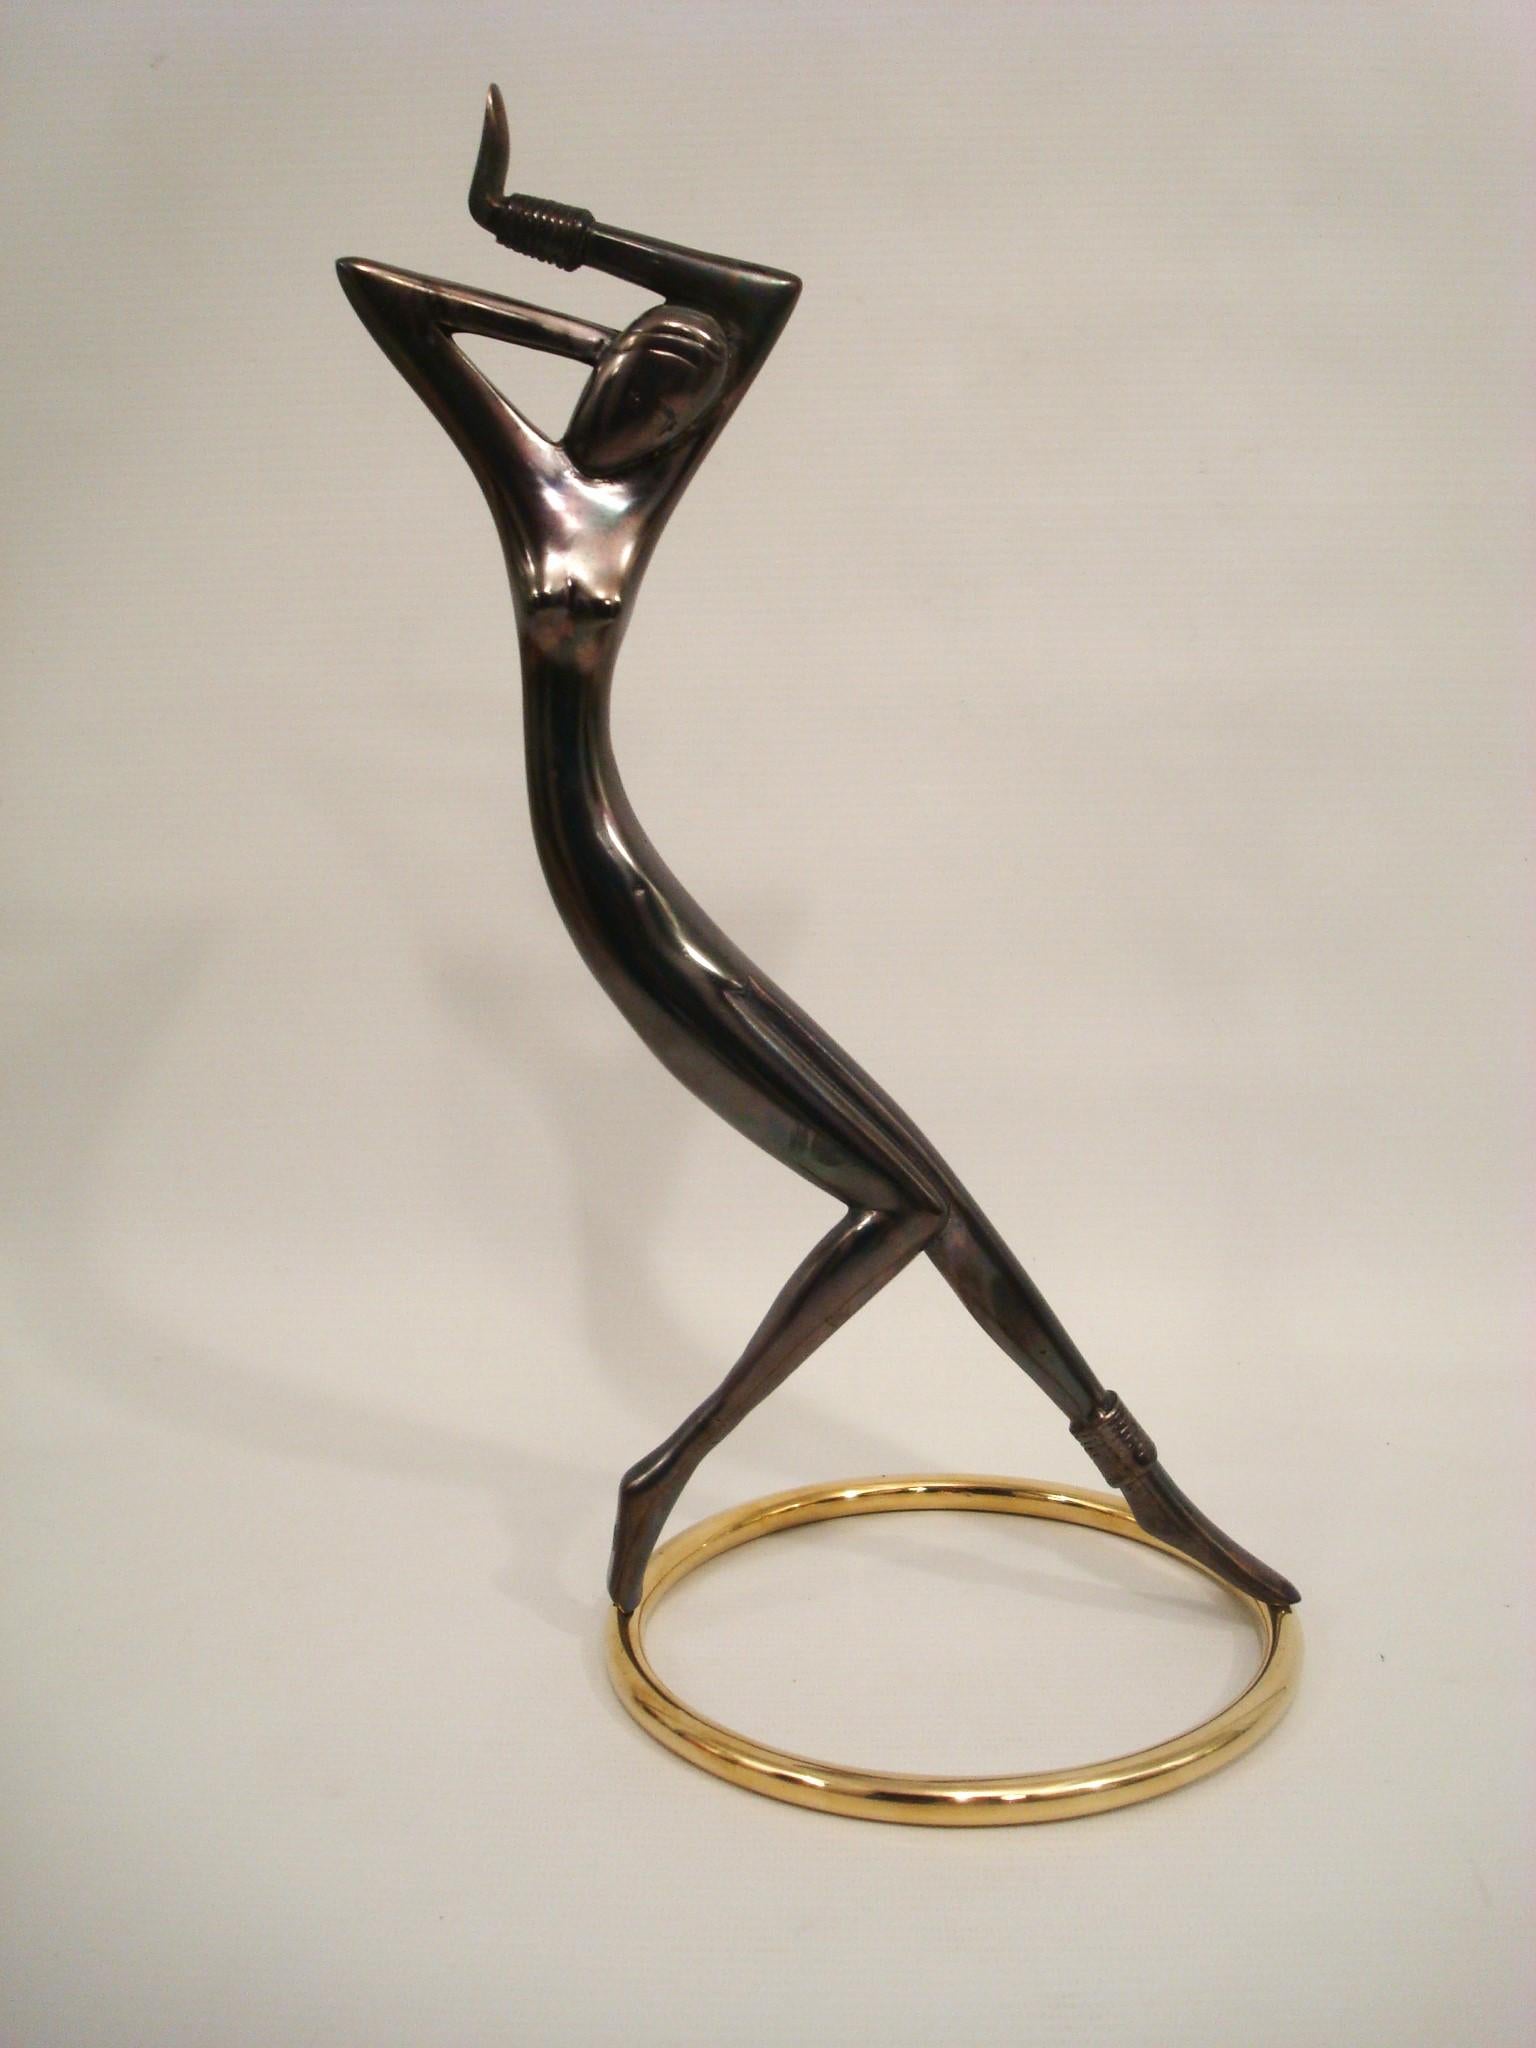 
Art Deco Hagenauer Bronze Figure of Josephine Baker, 20th century Impressed mark to foot: WHW

Hagenauer workshops were opened in Vienna in 1898 by Carl, the father of both Karl and Franz Hagenauer. It is the two sons contributions to the company,